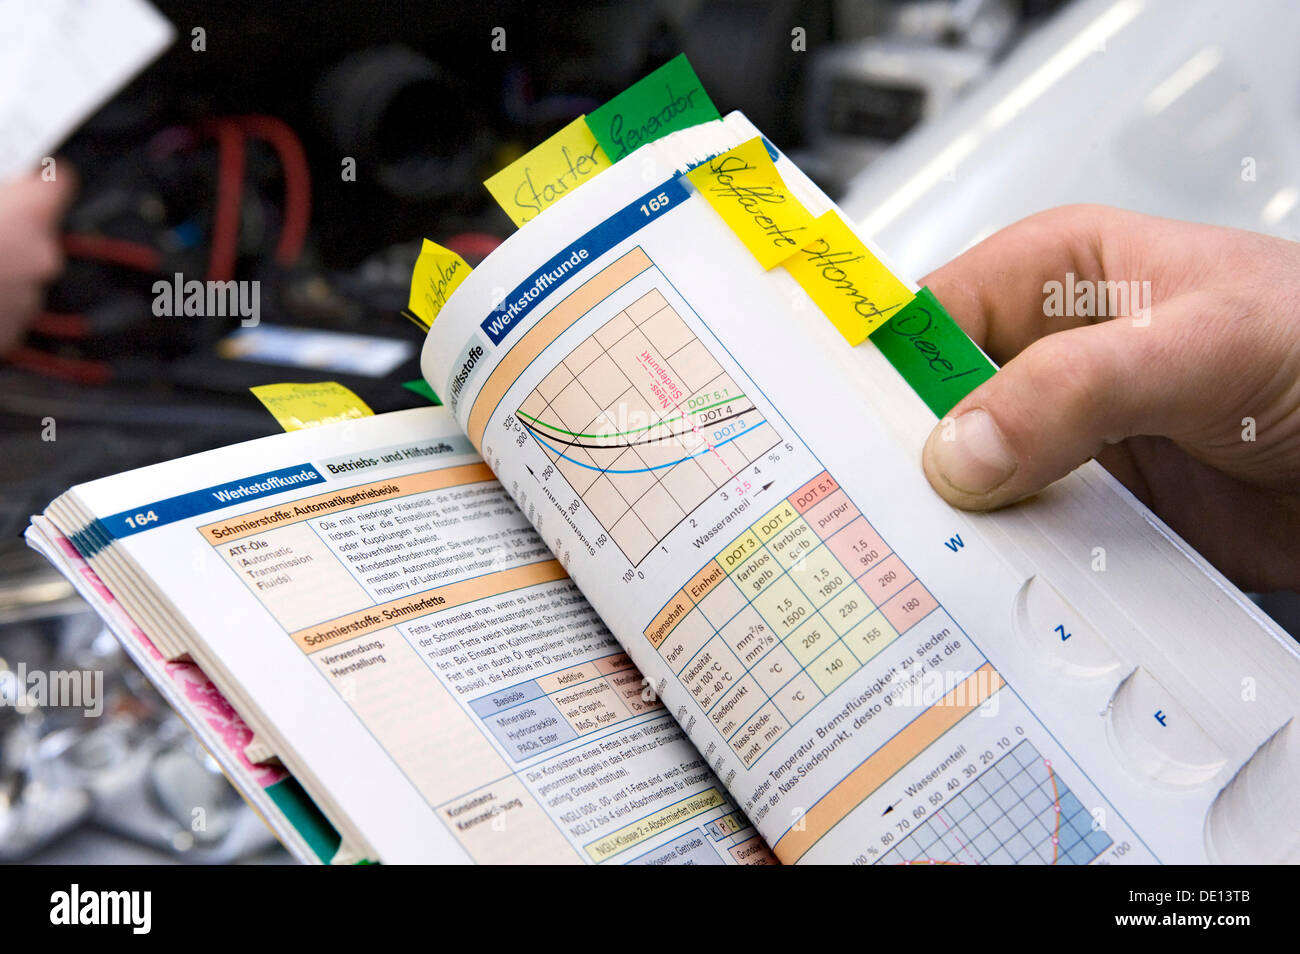 Working with a reference book, vocational programme for an automotive mechatronic engineer in the 2nd year of apprenticeship, Stock Photo